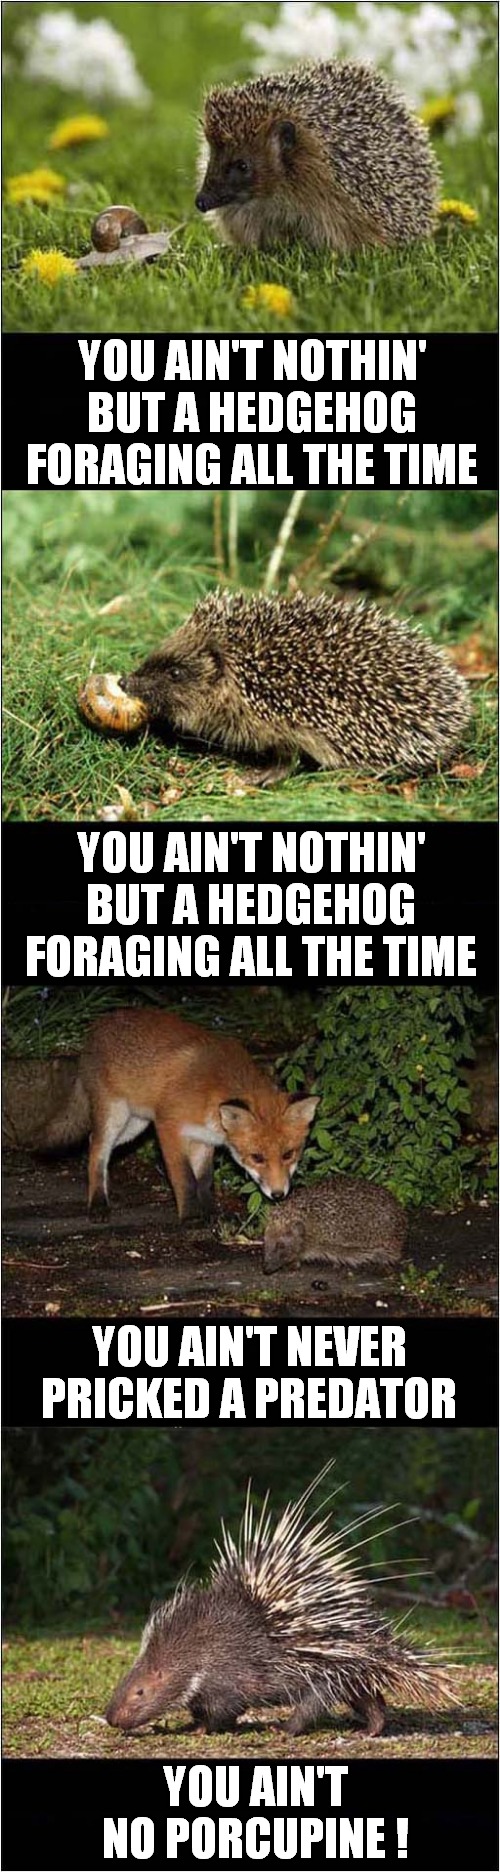 Nothin' But A Hedgehog ! | YOU AIN'T NOTHIN' BUT A HEDGEHOG
FORAGING ALL THE TIME; YOU AIN'T NOTHIN' BUT A HEDGEHOG
FORAGING ALL THE TIME; YOU AIN'T NEVER PRICKED A PREDATOR; YOU AIN'T NO PORCUPINE ! | image tagged in hedgehog,porcupine,misheard lyrics | made w/ Imgflip meme maker